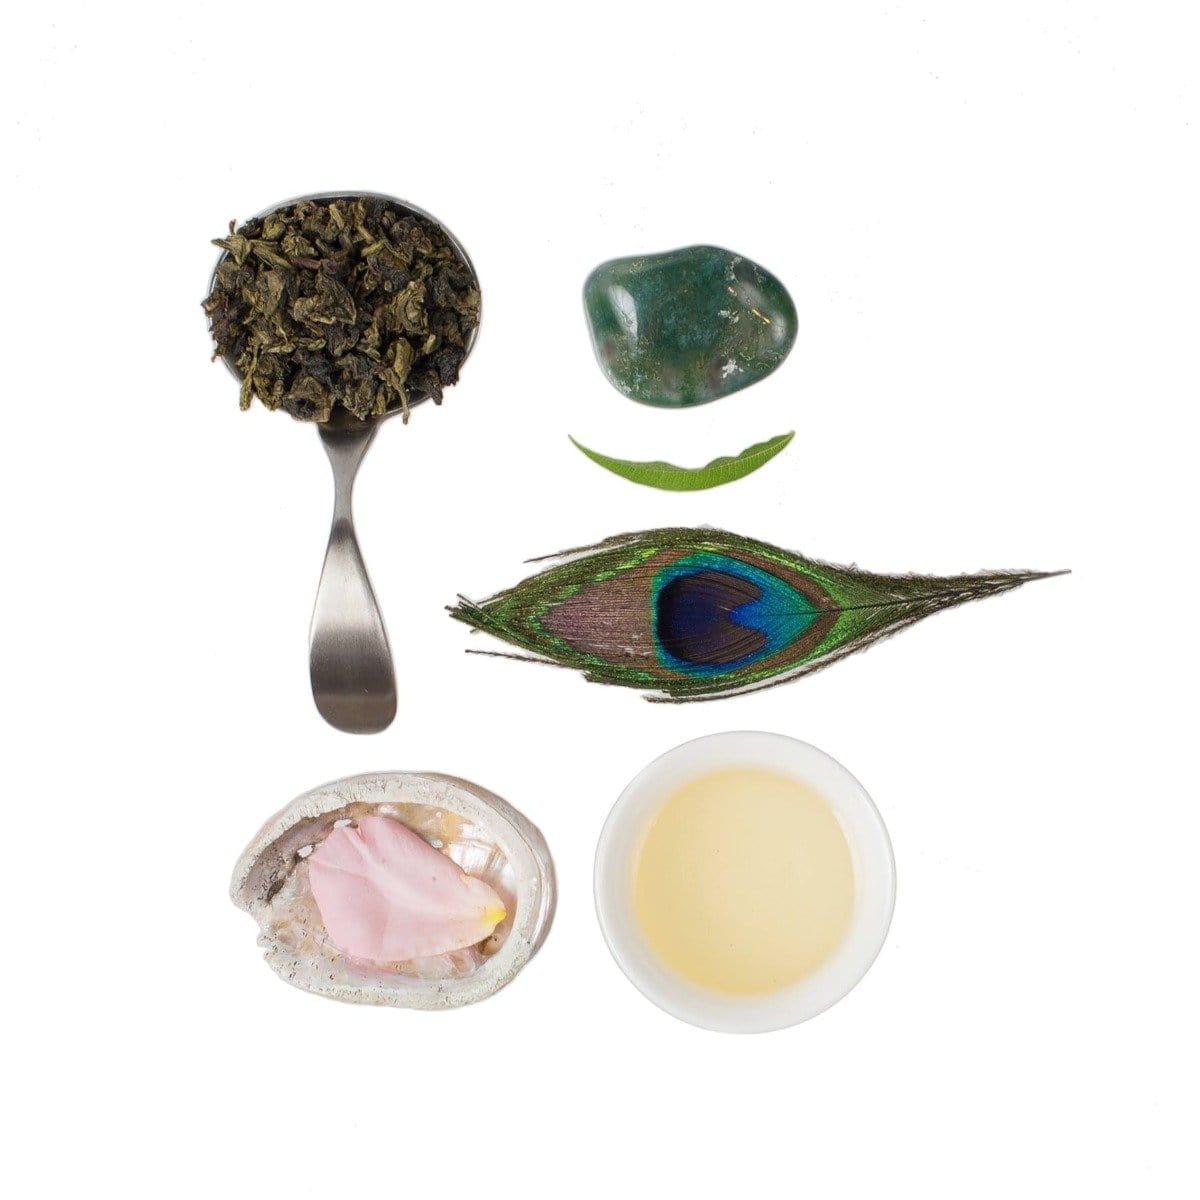 A composition displaying a spoonful of Ti Quan Yin Oolong: Tea of Patient Compassion leaves, a green gemstone, a peacock feather, a fresh leaf, a polished shell with a pink rose petal inside, and a cup of light-colored tea. All arranged neatly on a white background to highlight the wellness benefits of Magic Hour Ti Quan Yin Oolong: Tea of Patient Compassion.